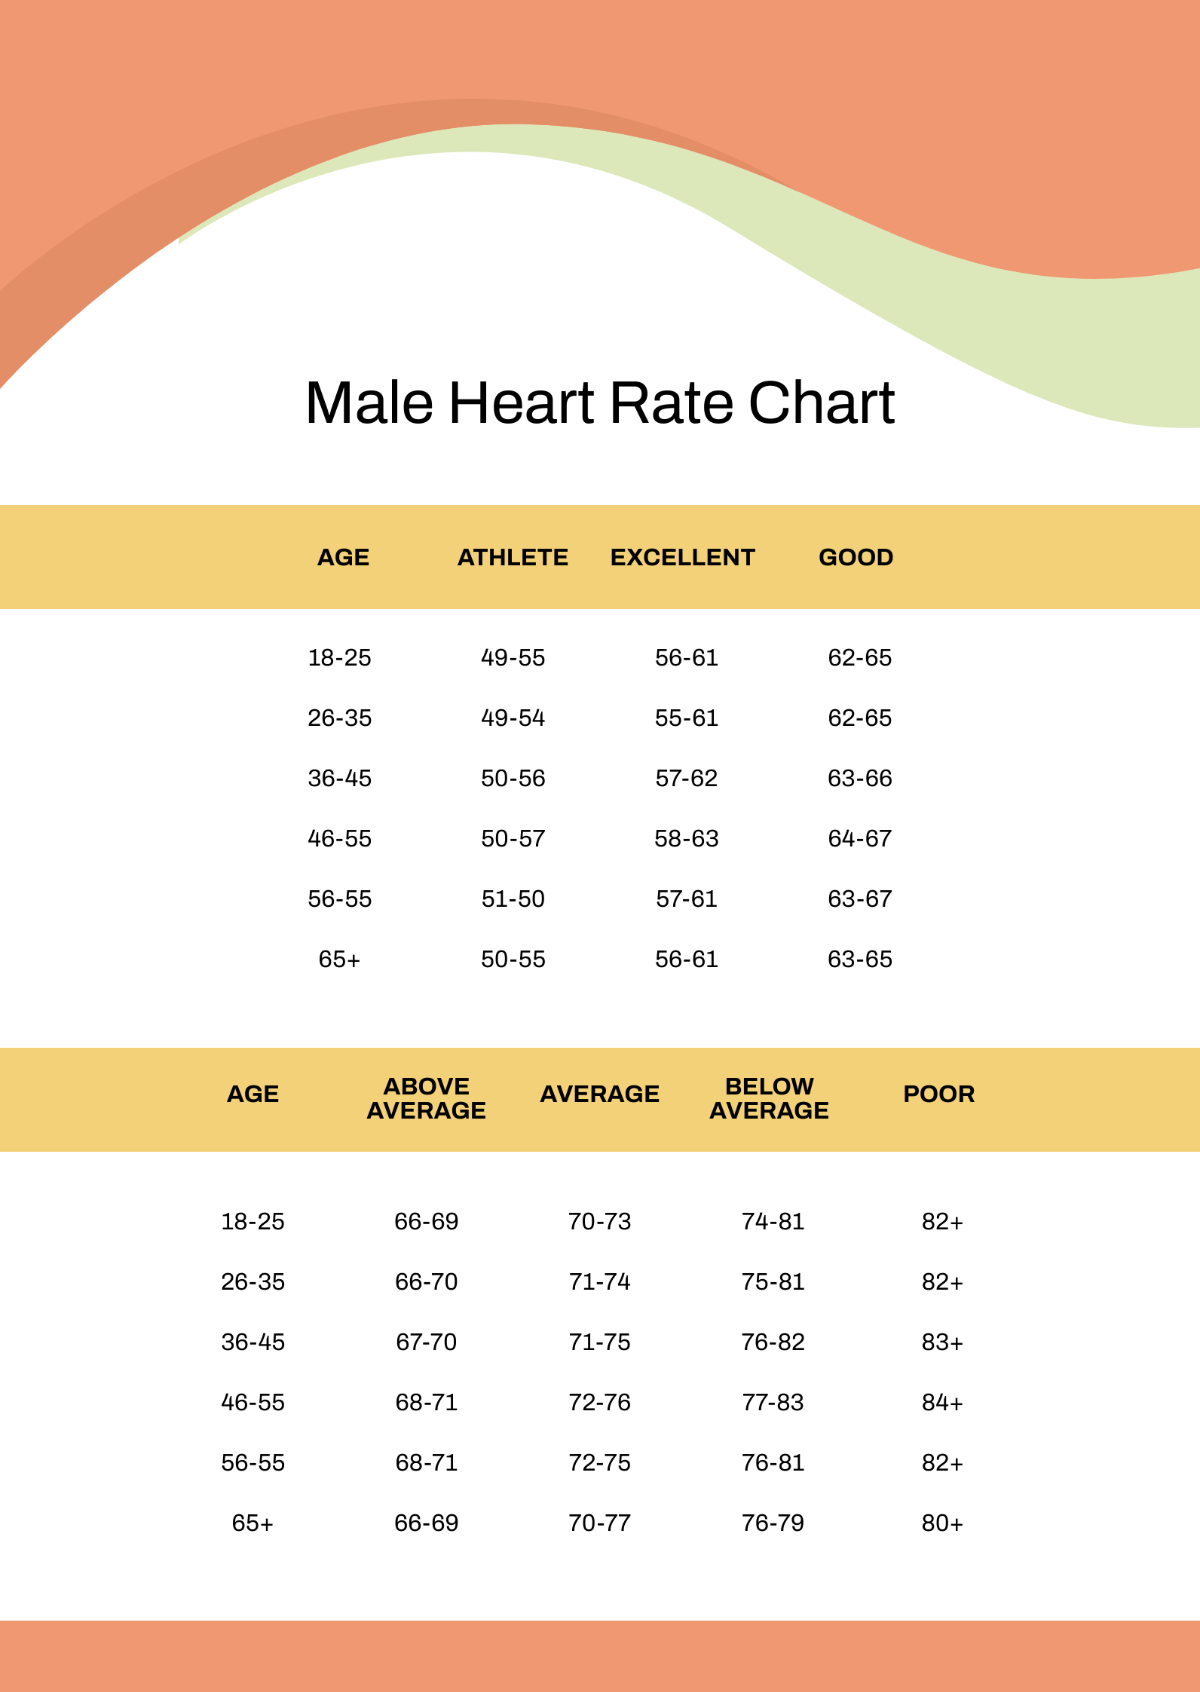 Male Heart Rate Chart Template